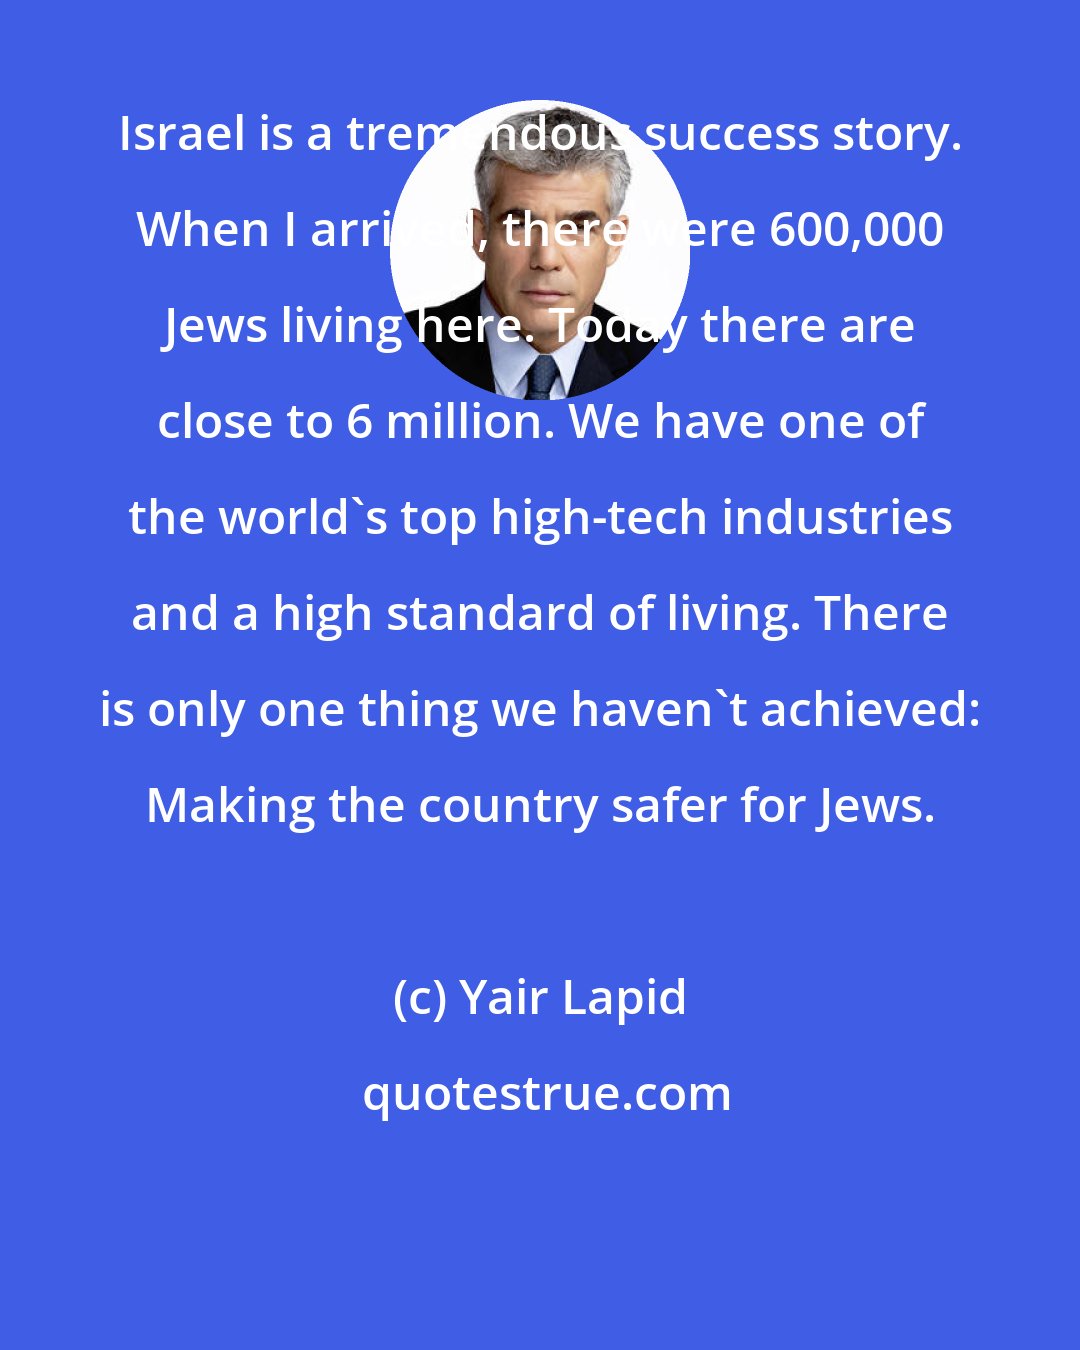 Yair Lapid: Israel is a tremendous success story. When I arrived, there were 600,000 Jews living here. Today there are close to 6 million. We have one of the world's top high-tech industries and a high standard of living. There is only one thing we haven't achieved: Making the country safer for Jews.